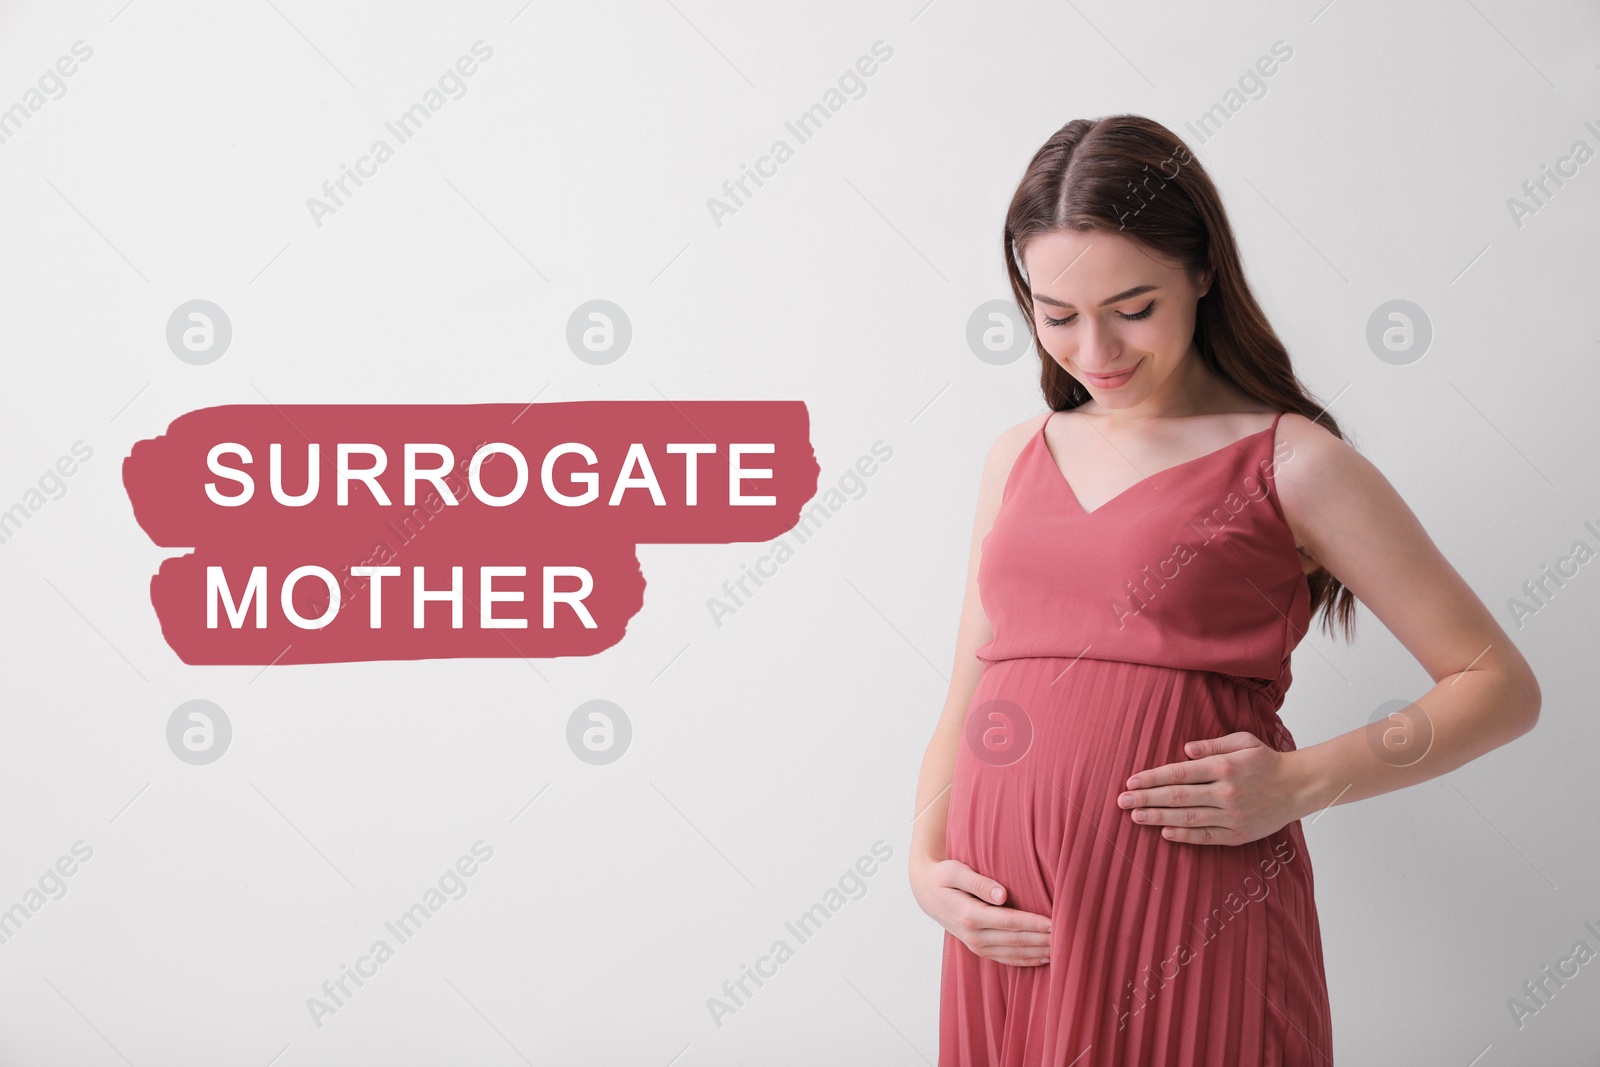 Image of Surrogate mother. Pregnant woman touching her belly on light background